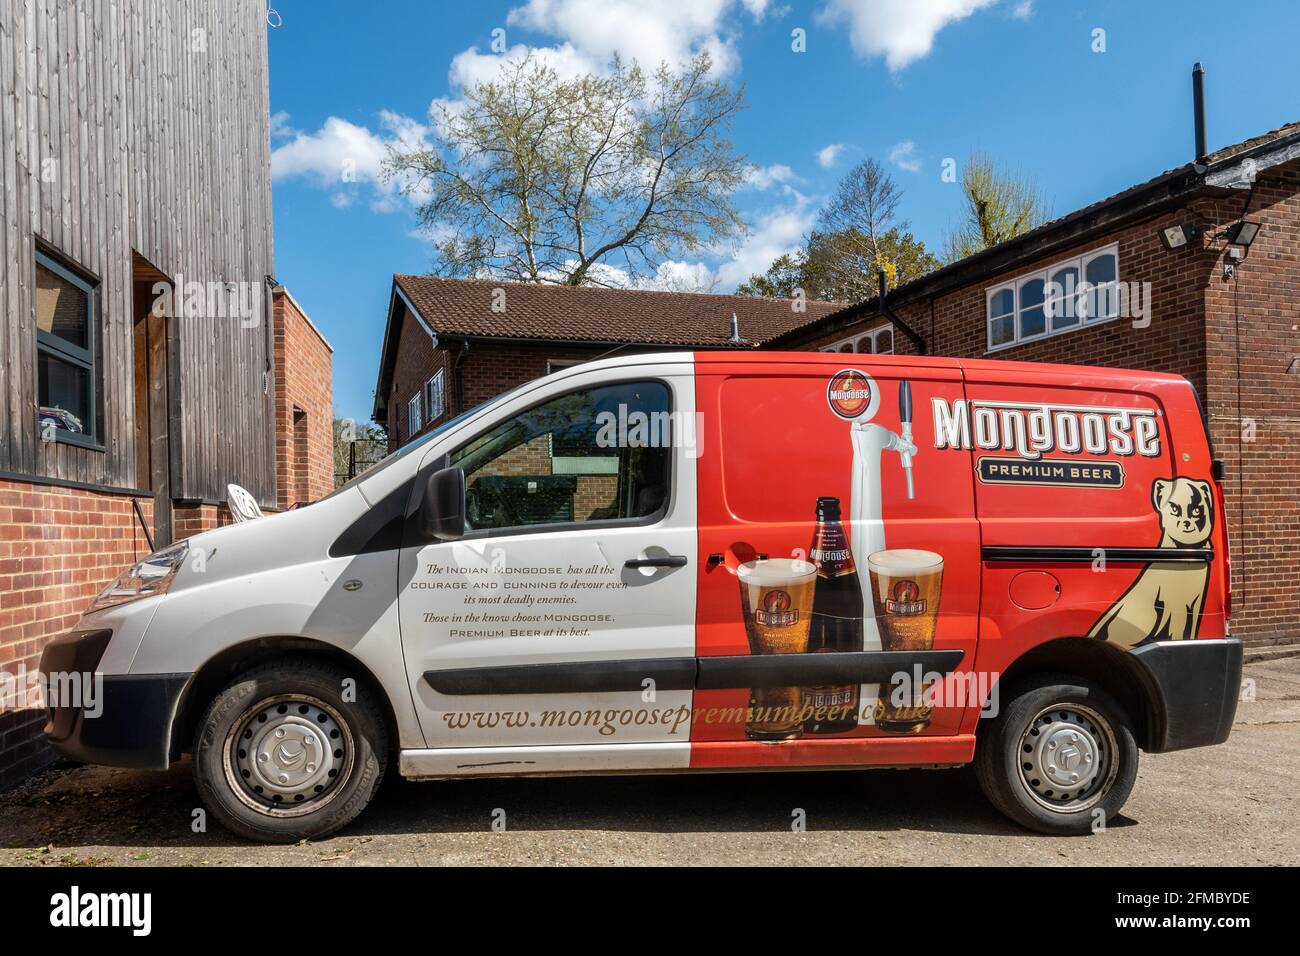 Mongoose premium beer delivery van at Andwell Brewing Company, a micro-brewery in Andwell, Hampshire, UK Stock Photo